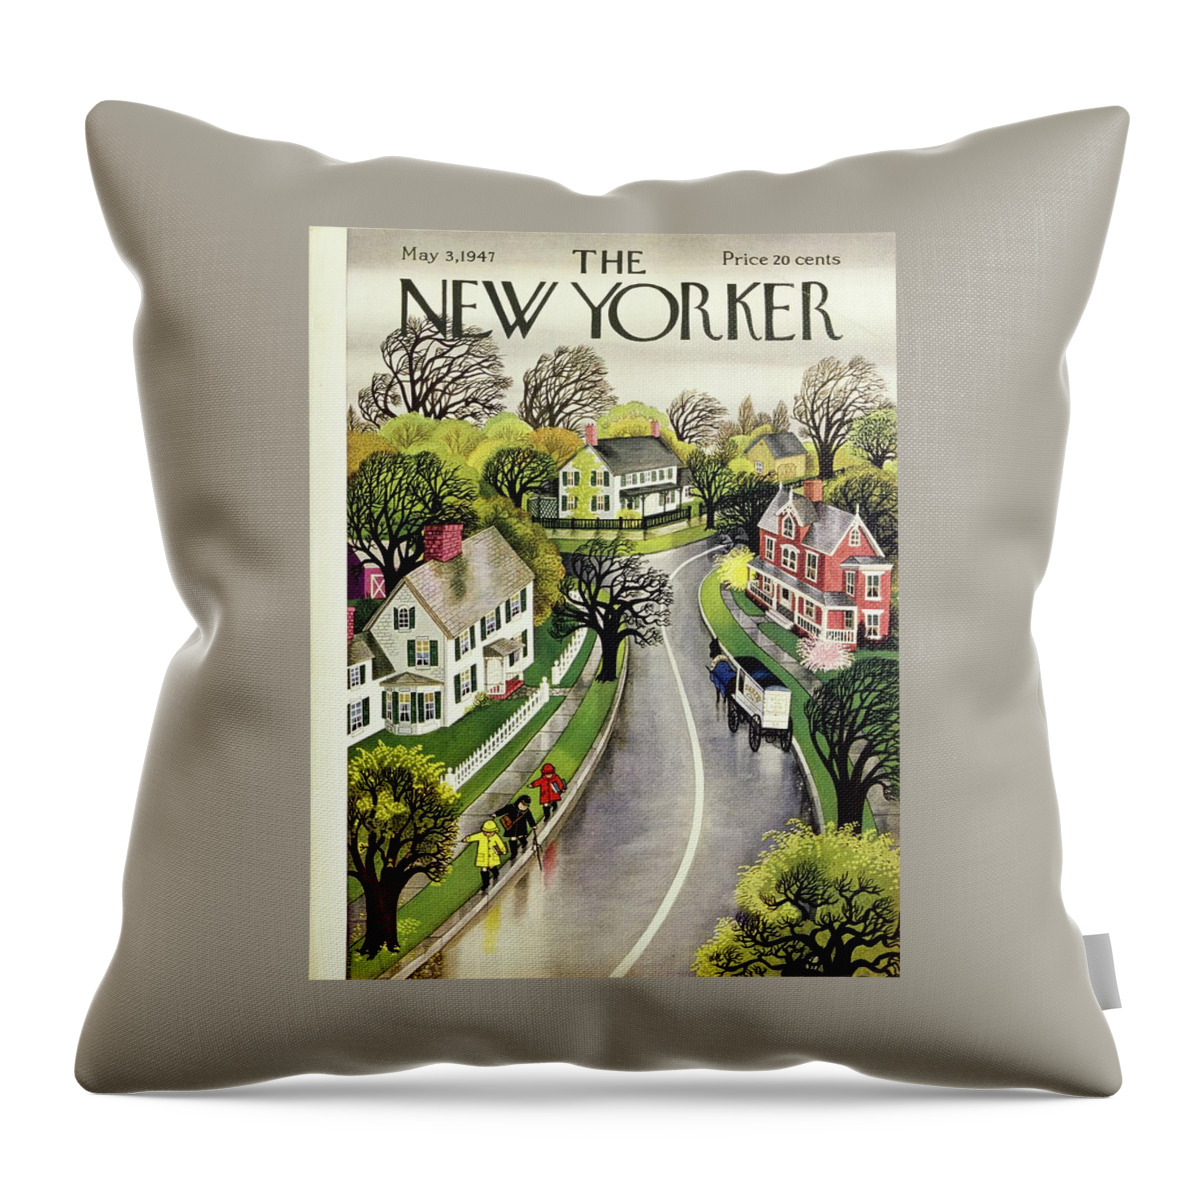 New Yorker May 3, 1947 Throw Pillow